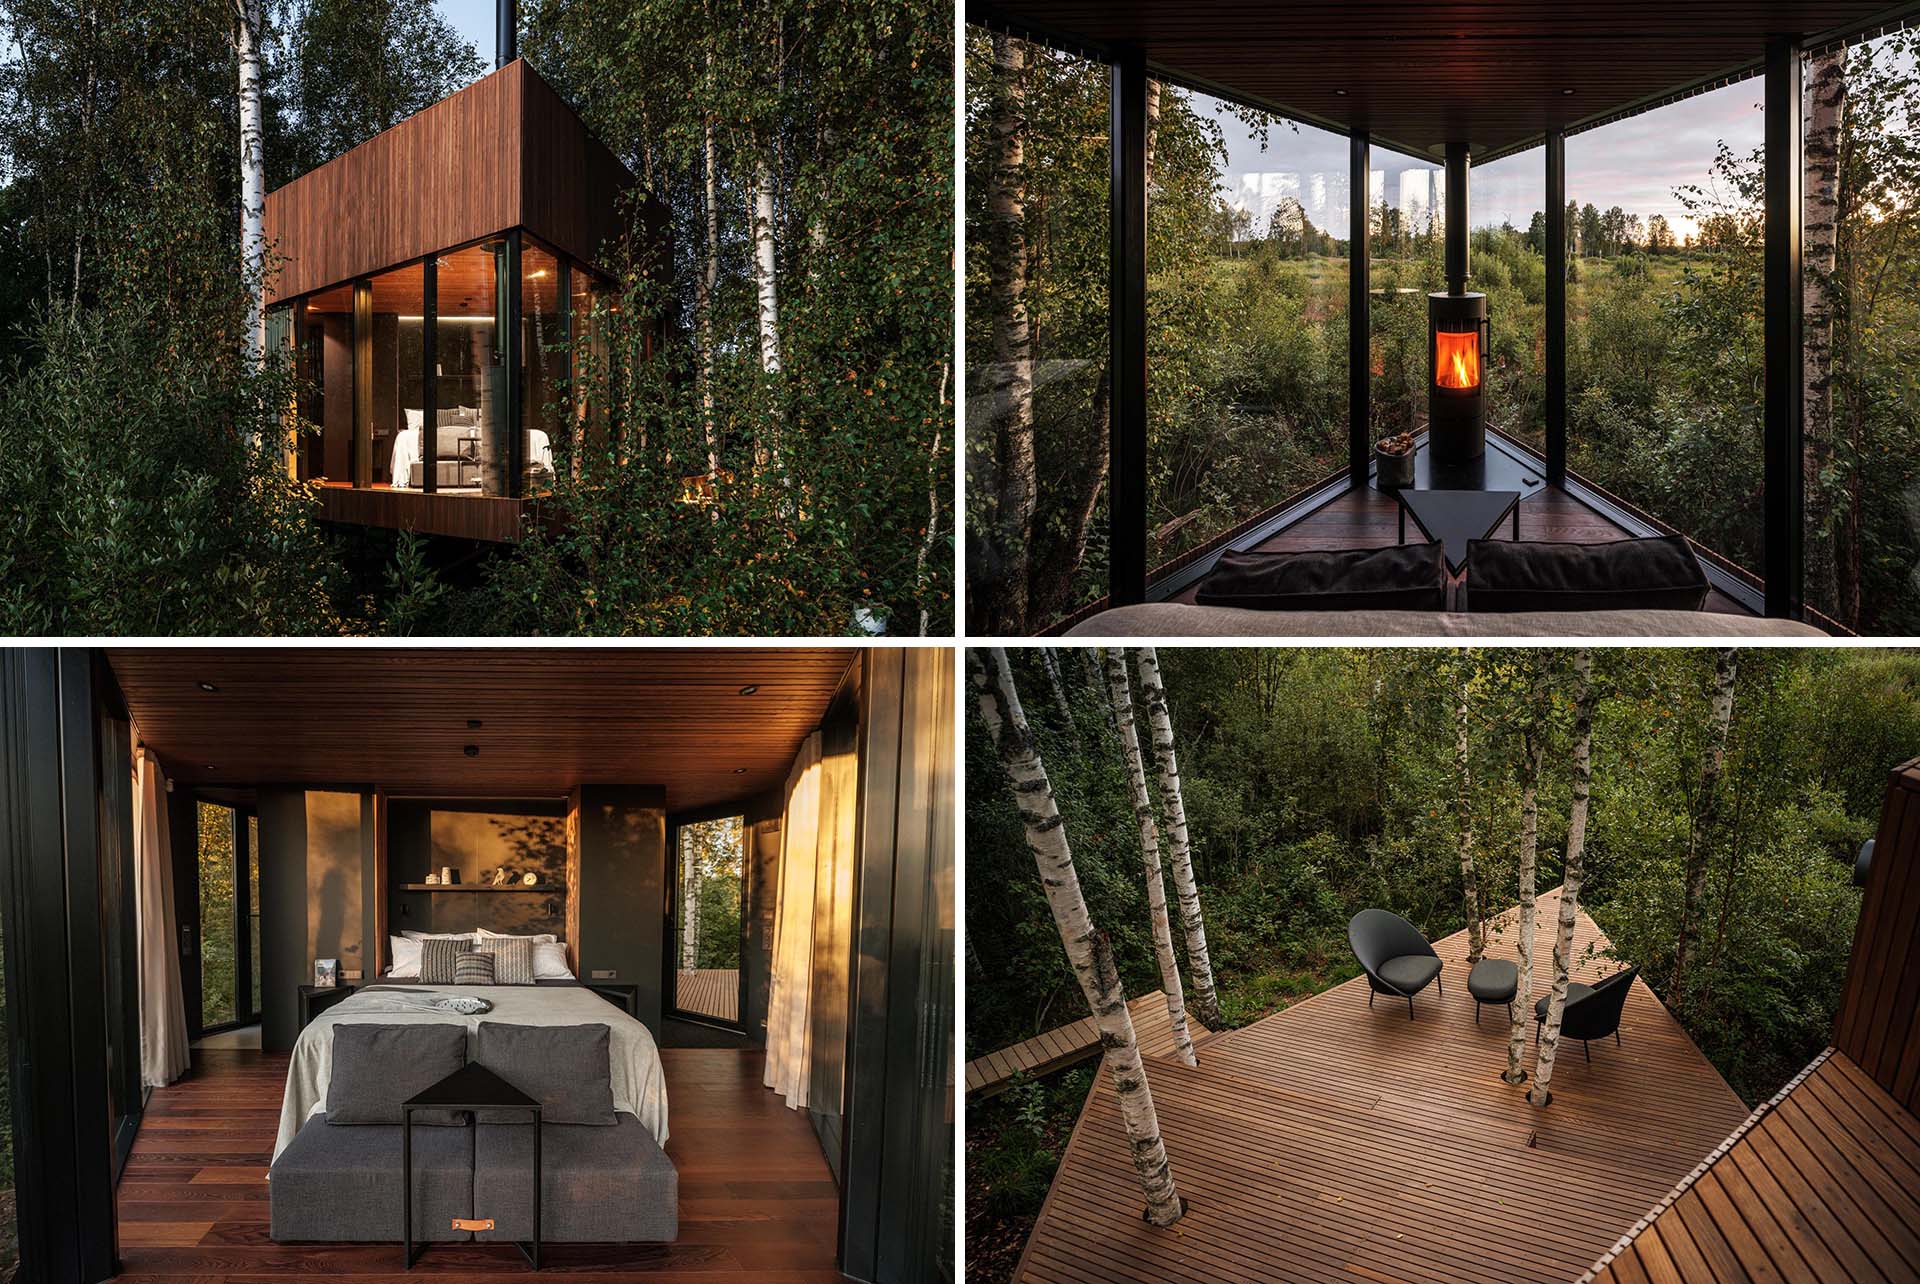 Located on the edge of a bog, this small cabin is designed for 1-2 visitors, and has an angular design with dark brown ash wood walls combined with large windows.